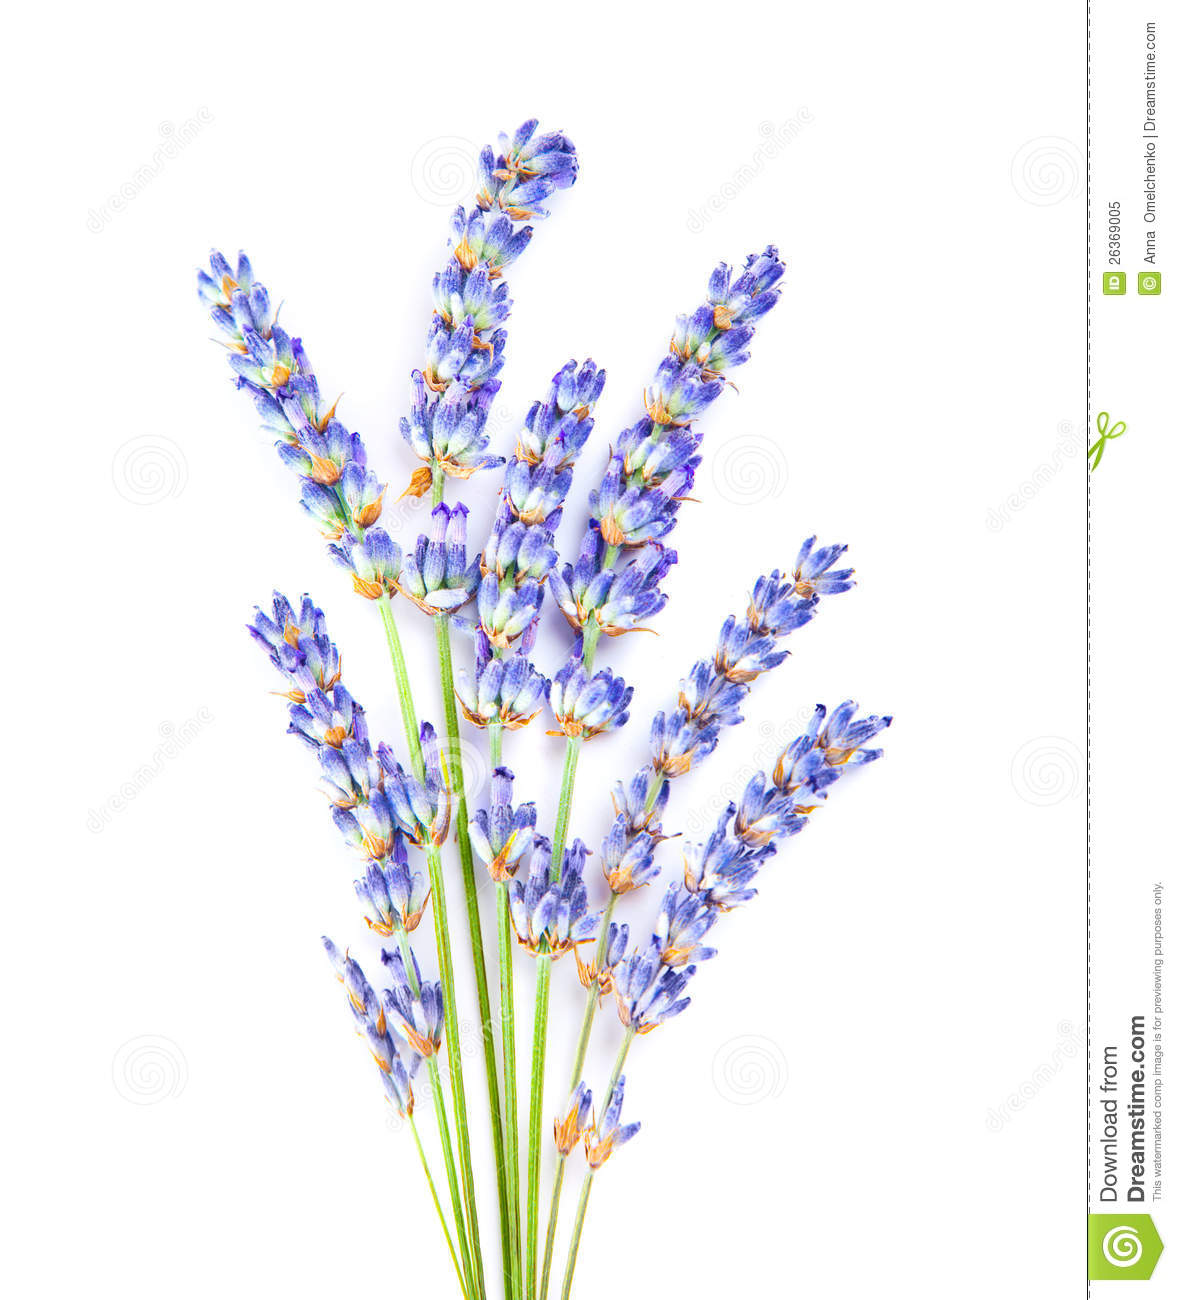 Lavender Flowers Little Posy Of Aromatic Medicinal Herb Fresh Plant